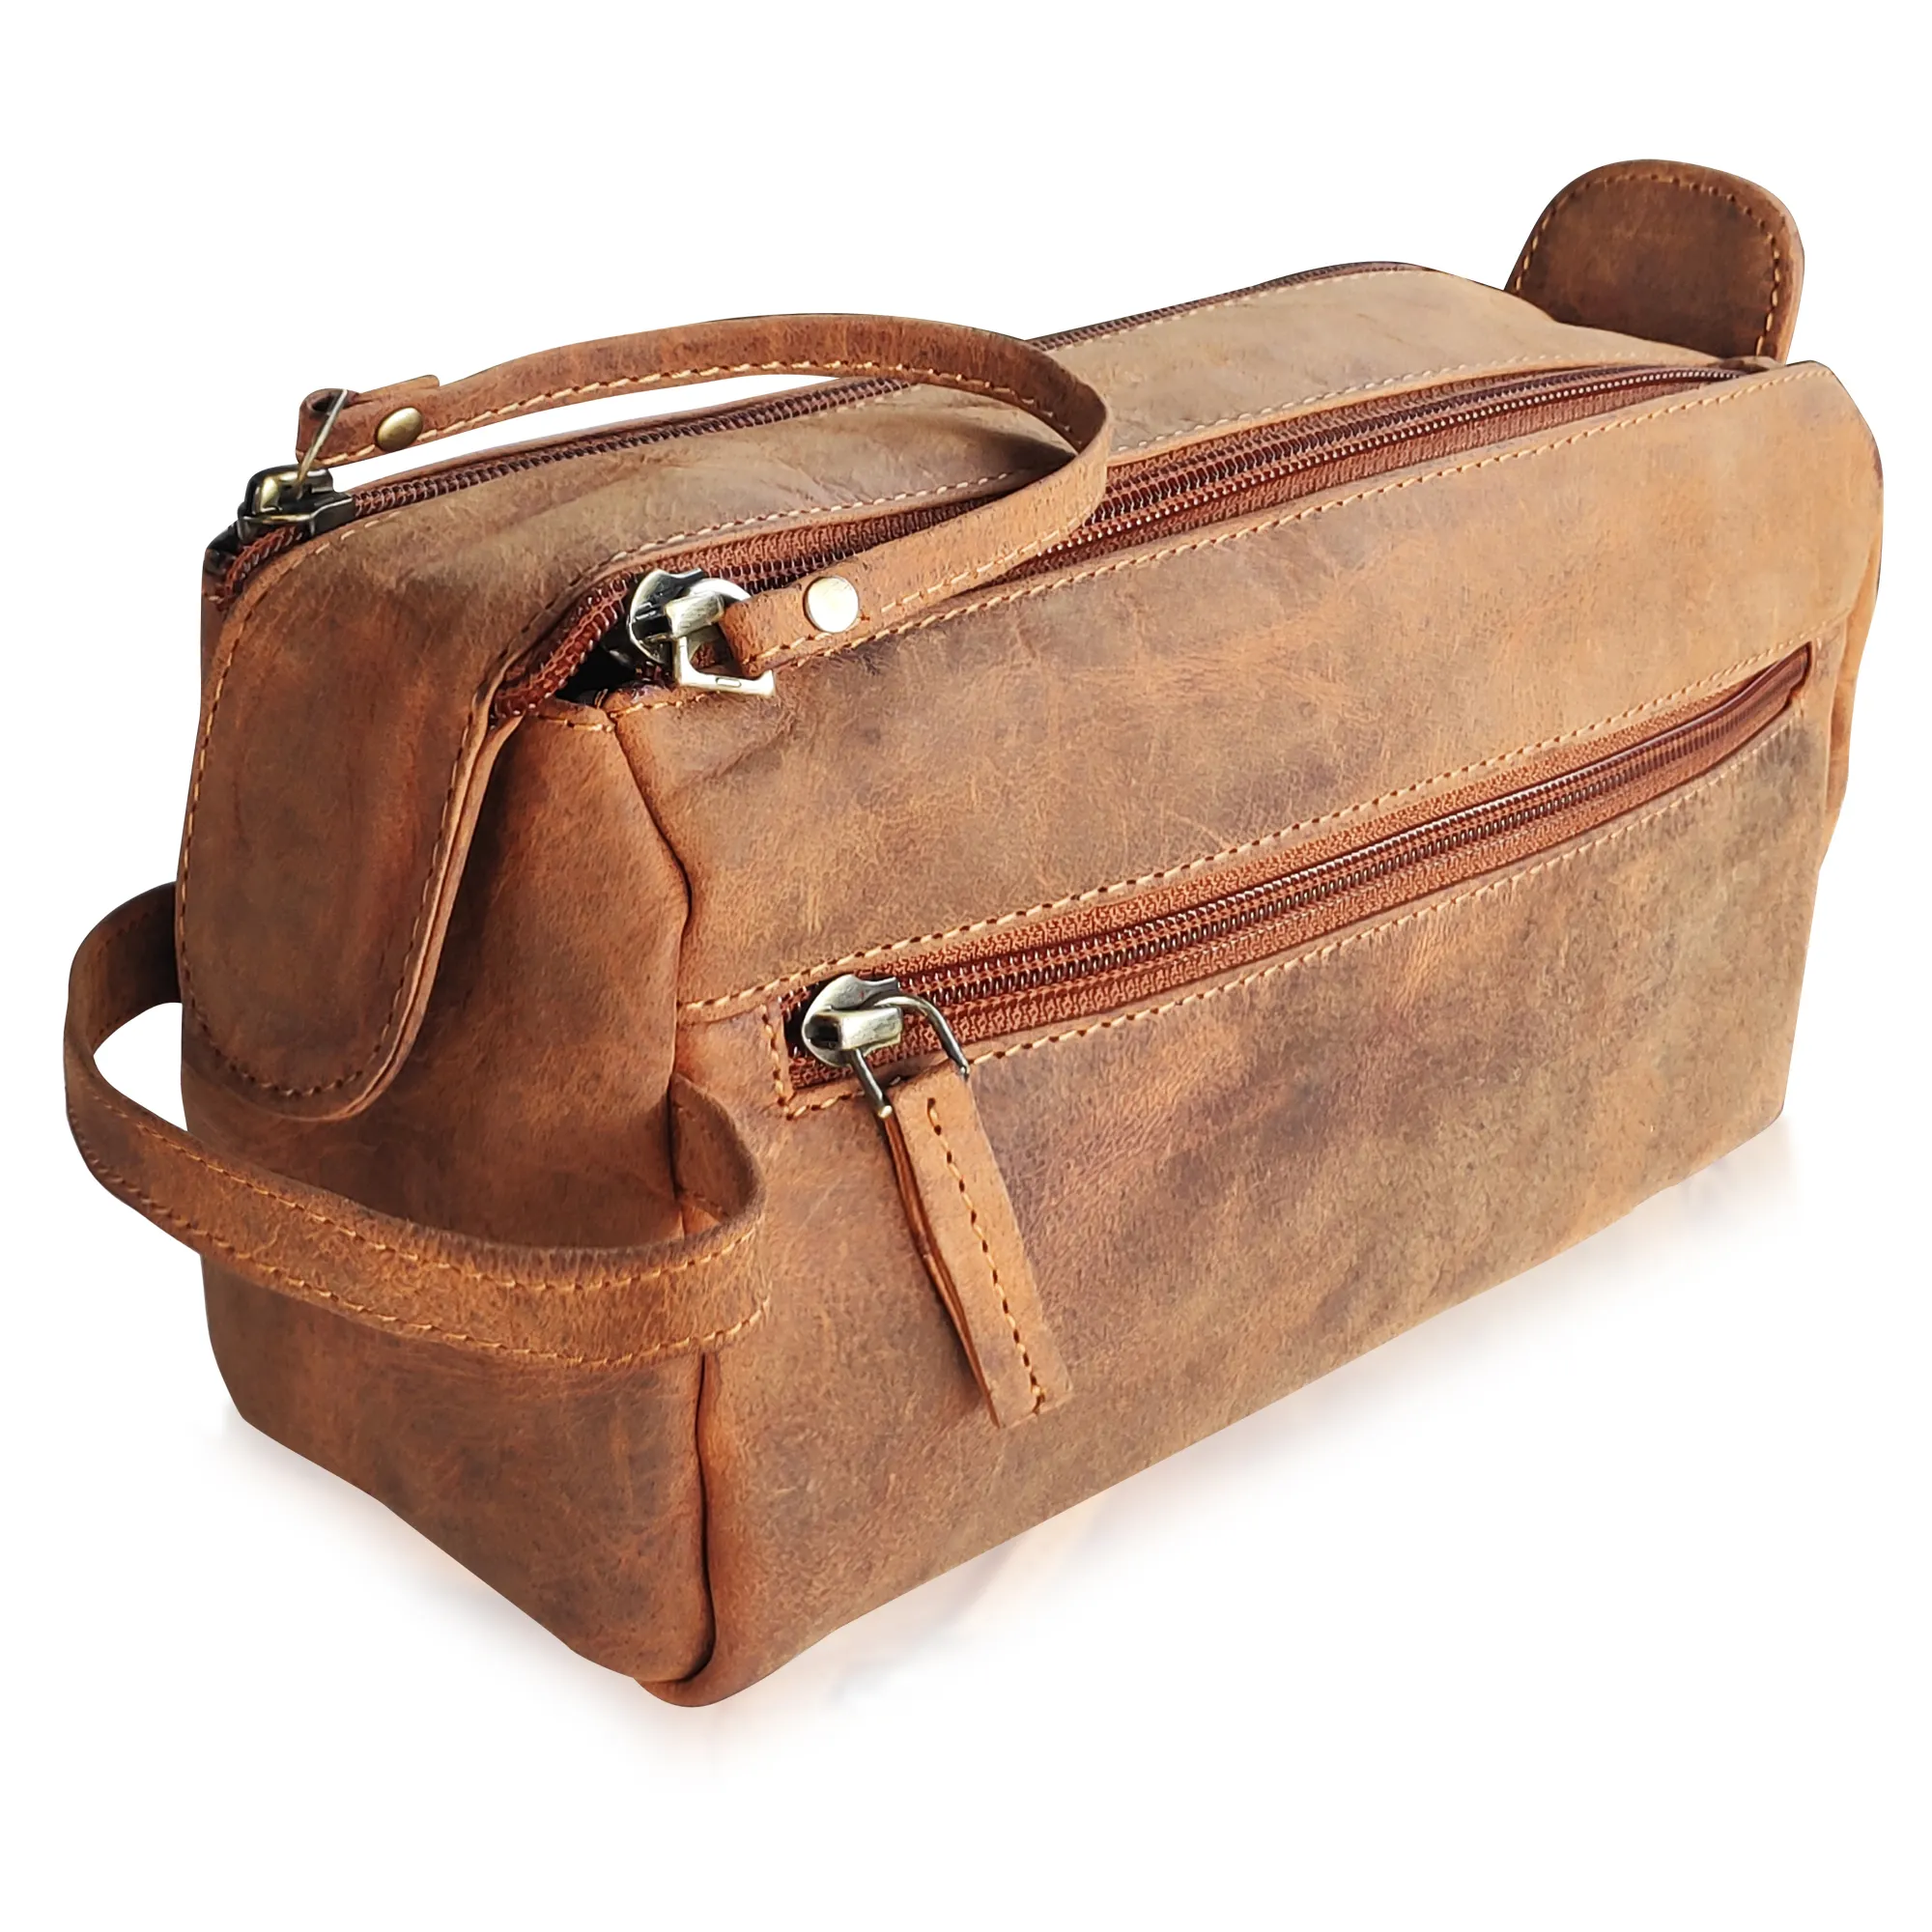 Handcrafted Genuine Waterproof Men's Leather Toiletry Bag Travel Organizer Gifts for Him Her Brown